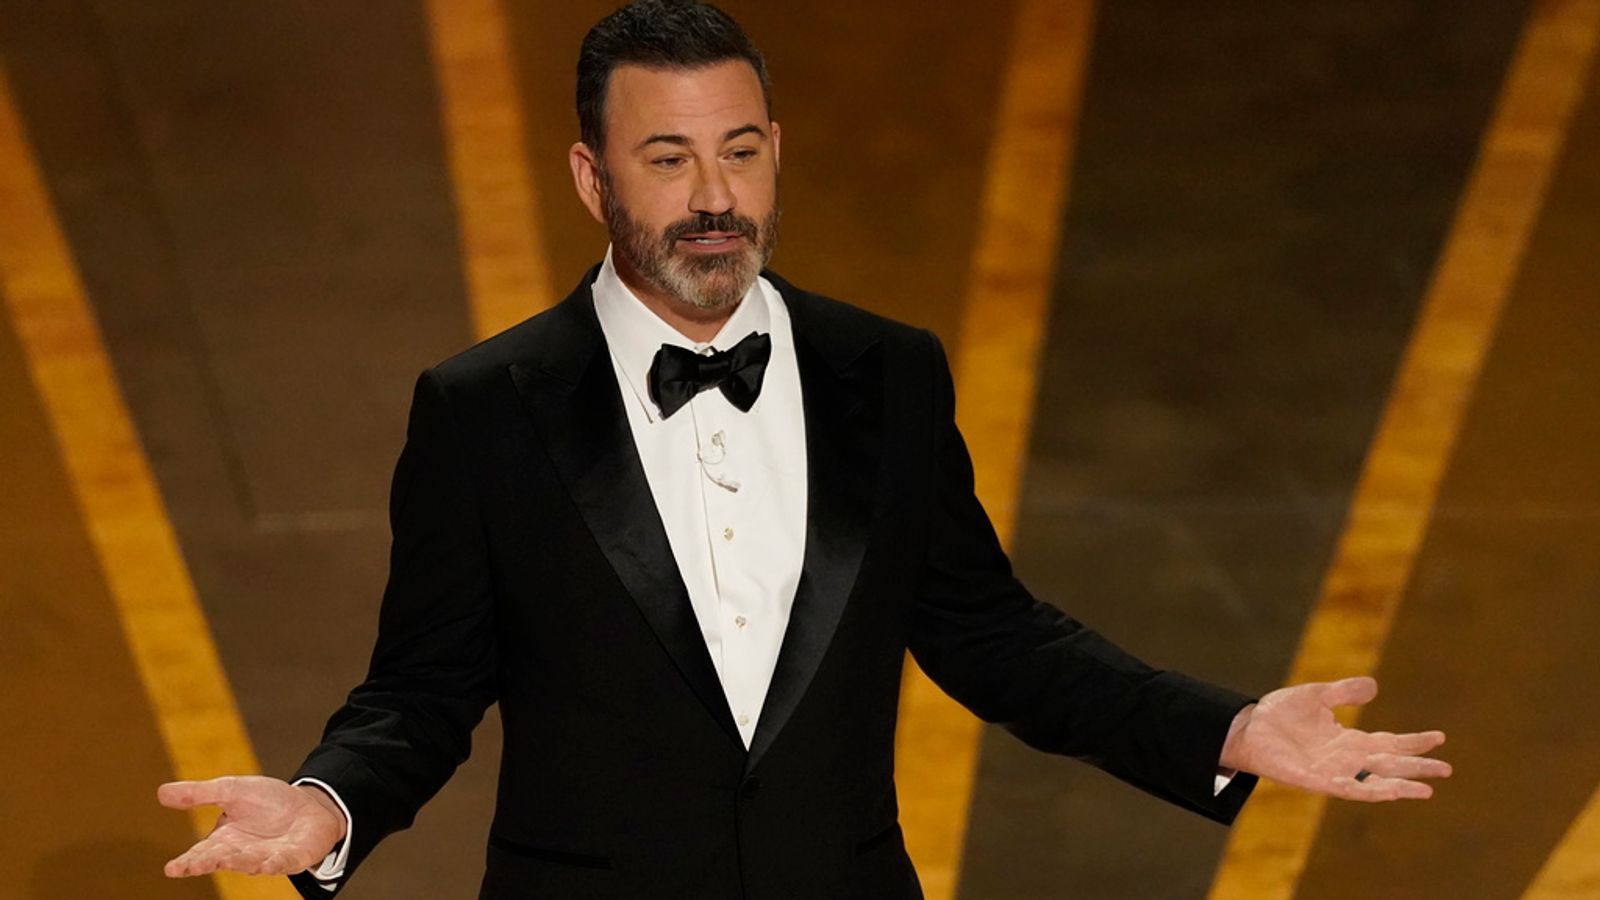 Jimmy Kimmel to host next year's Oscars - his fourth time presenting the awards